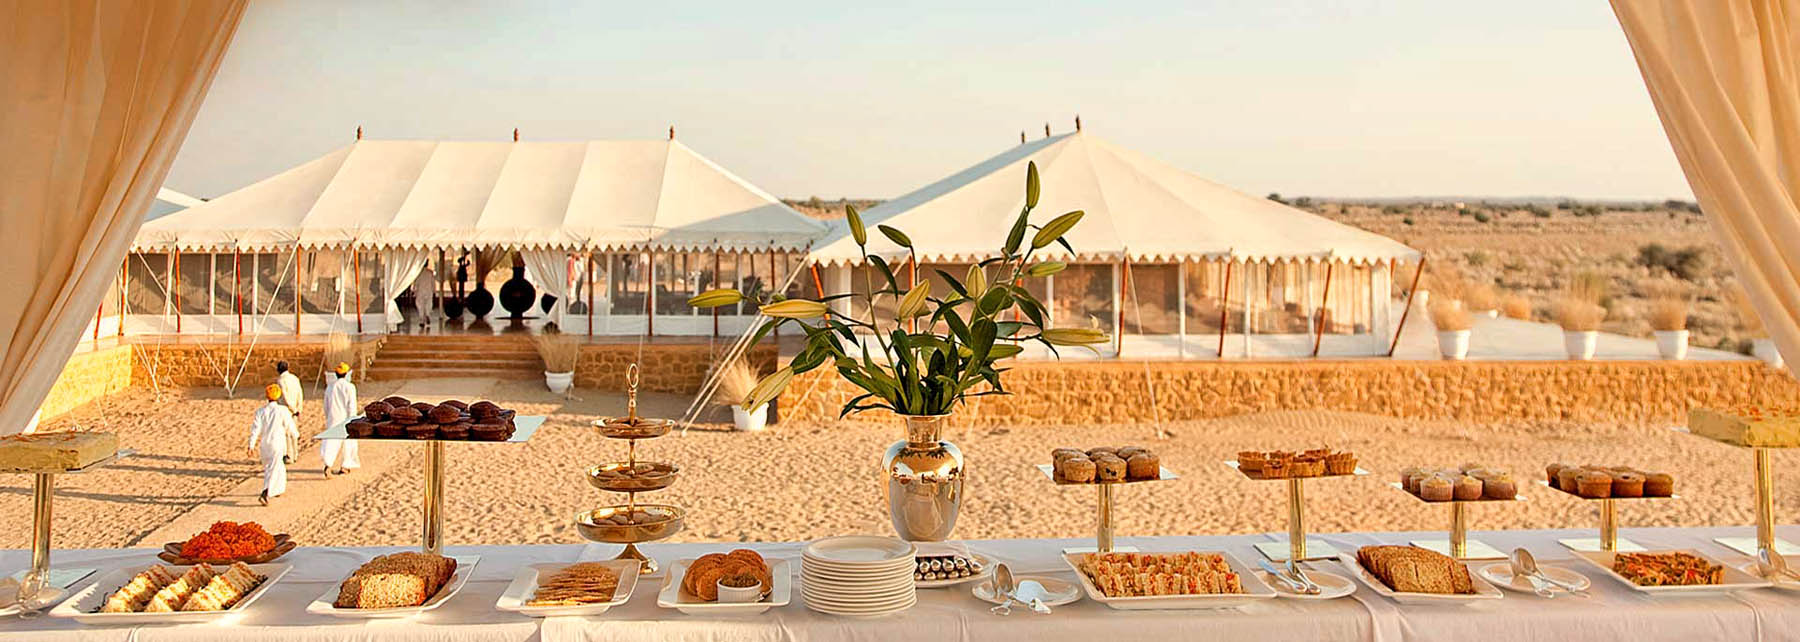 Desert Holiday Dining Experience